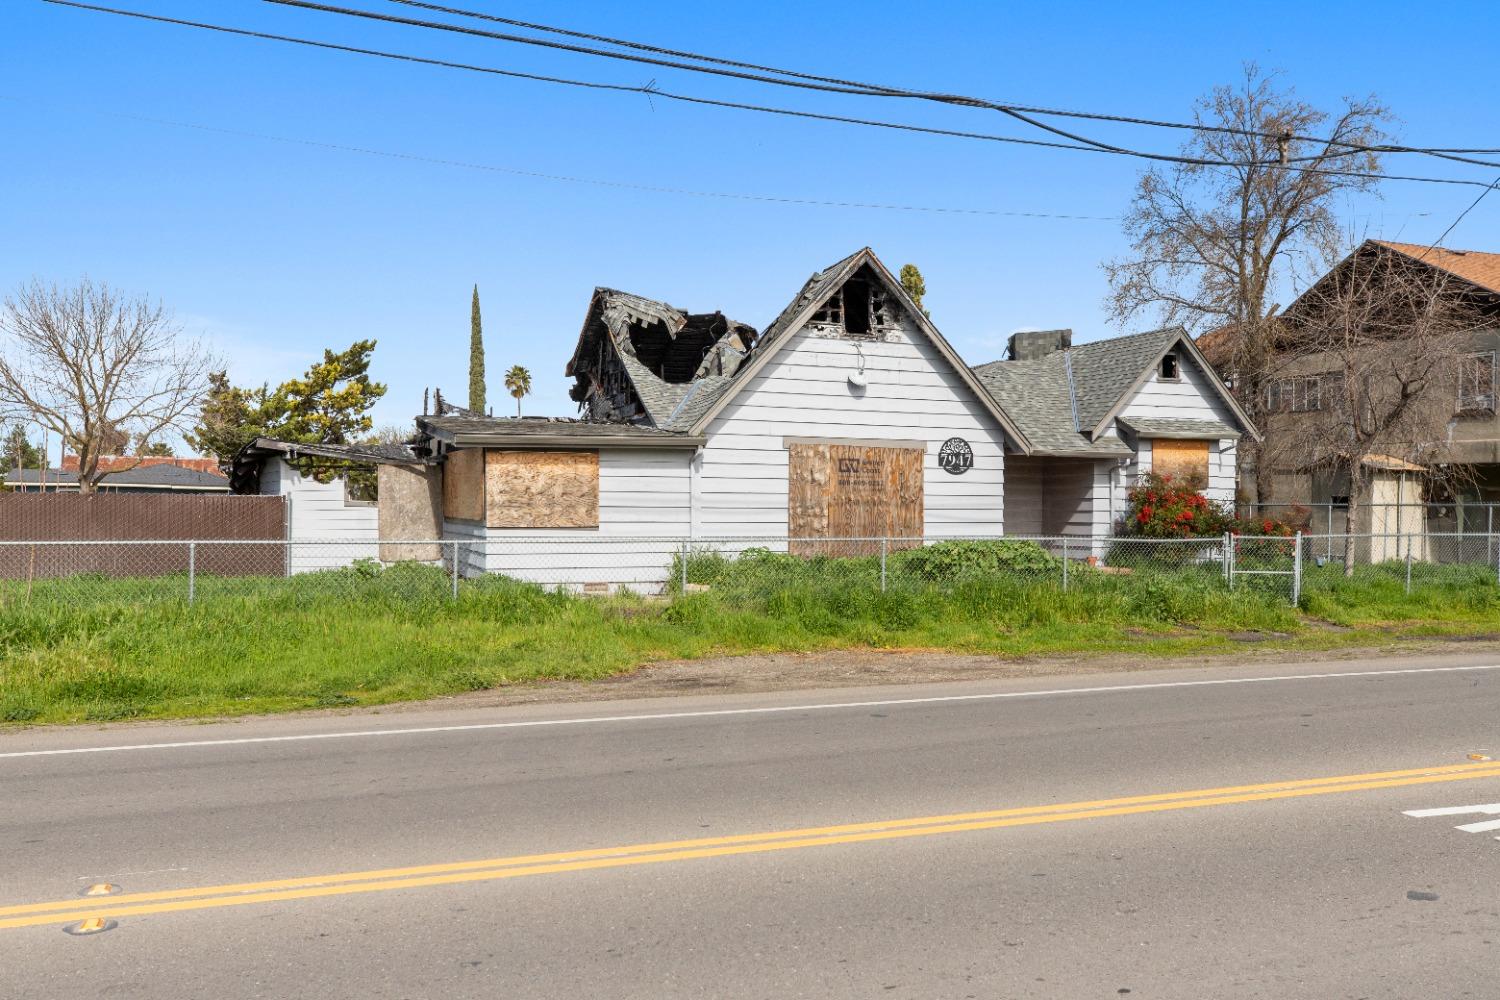 Photo of 7947 Ash St in French Camp, CA